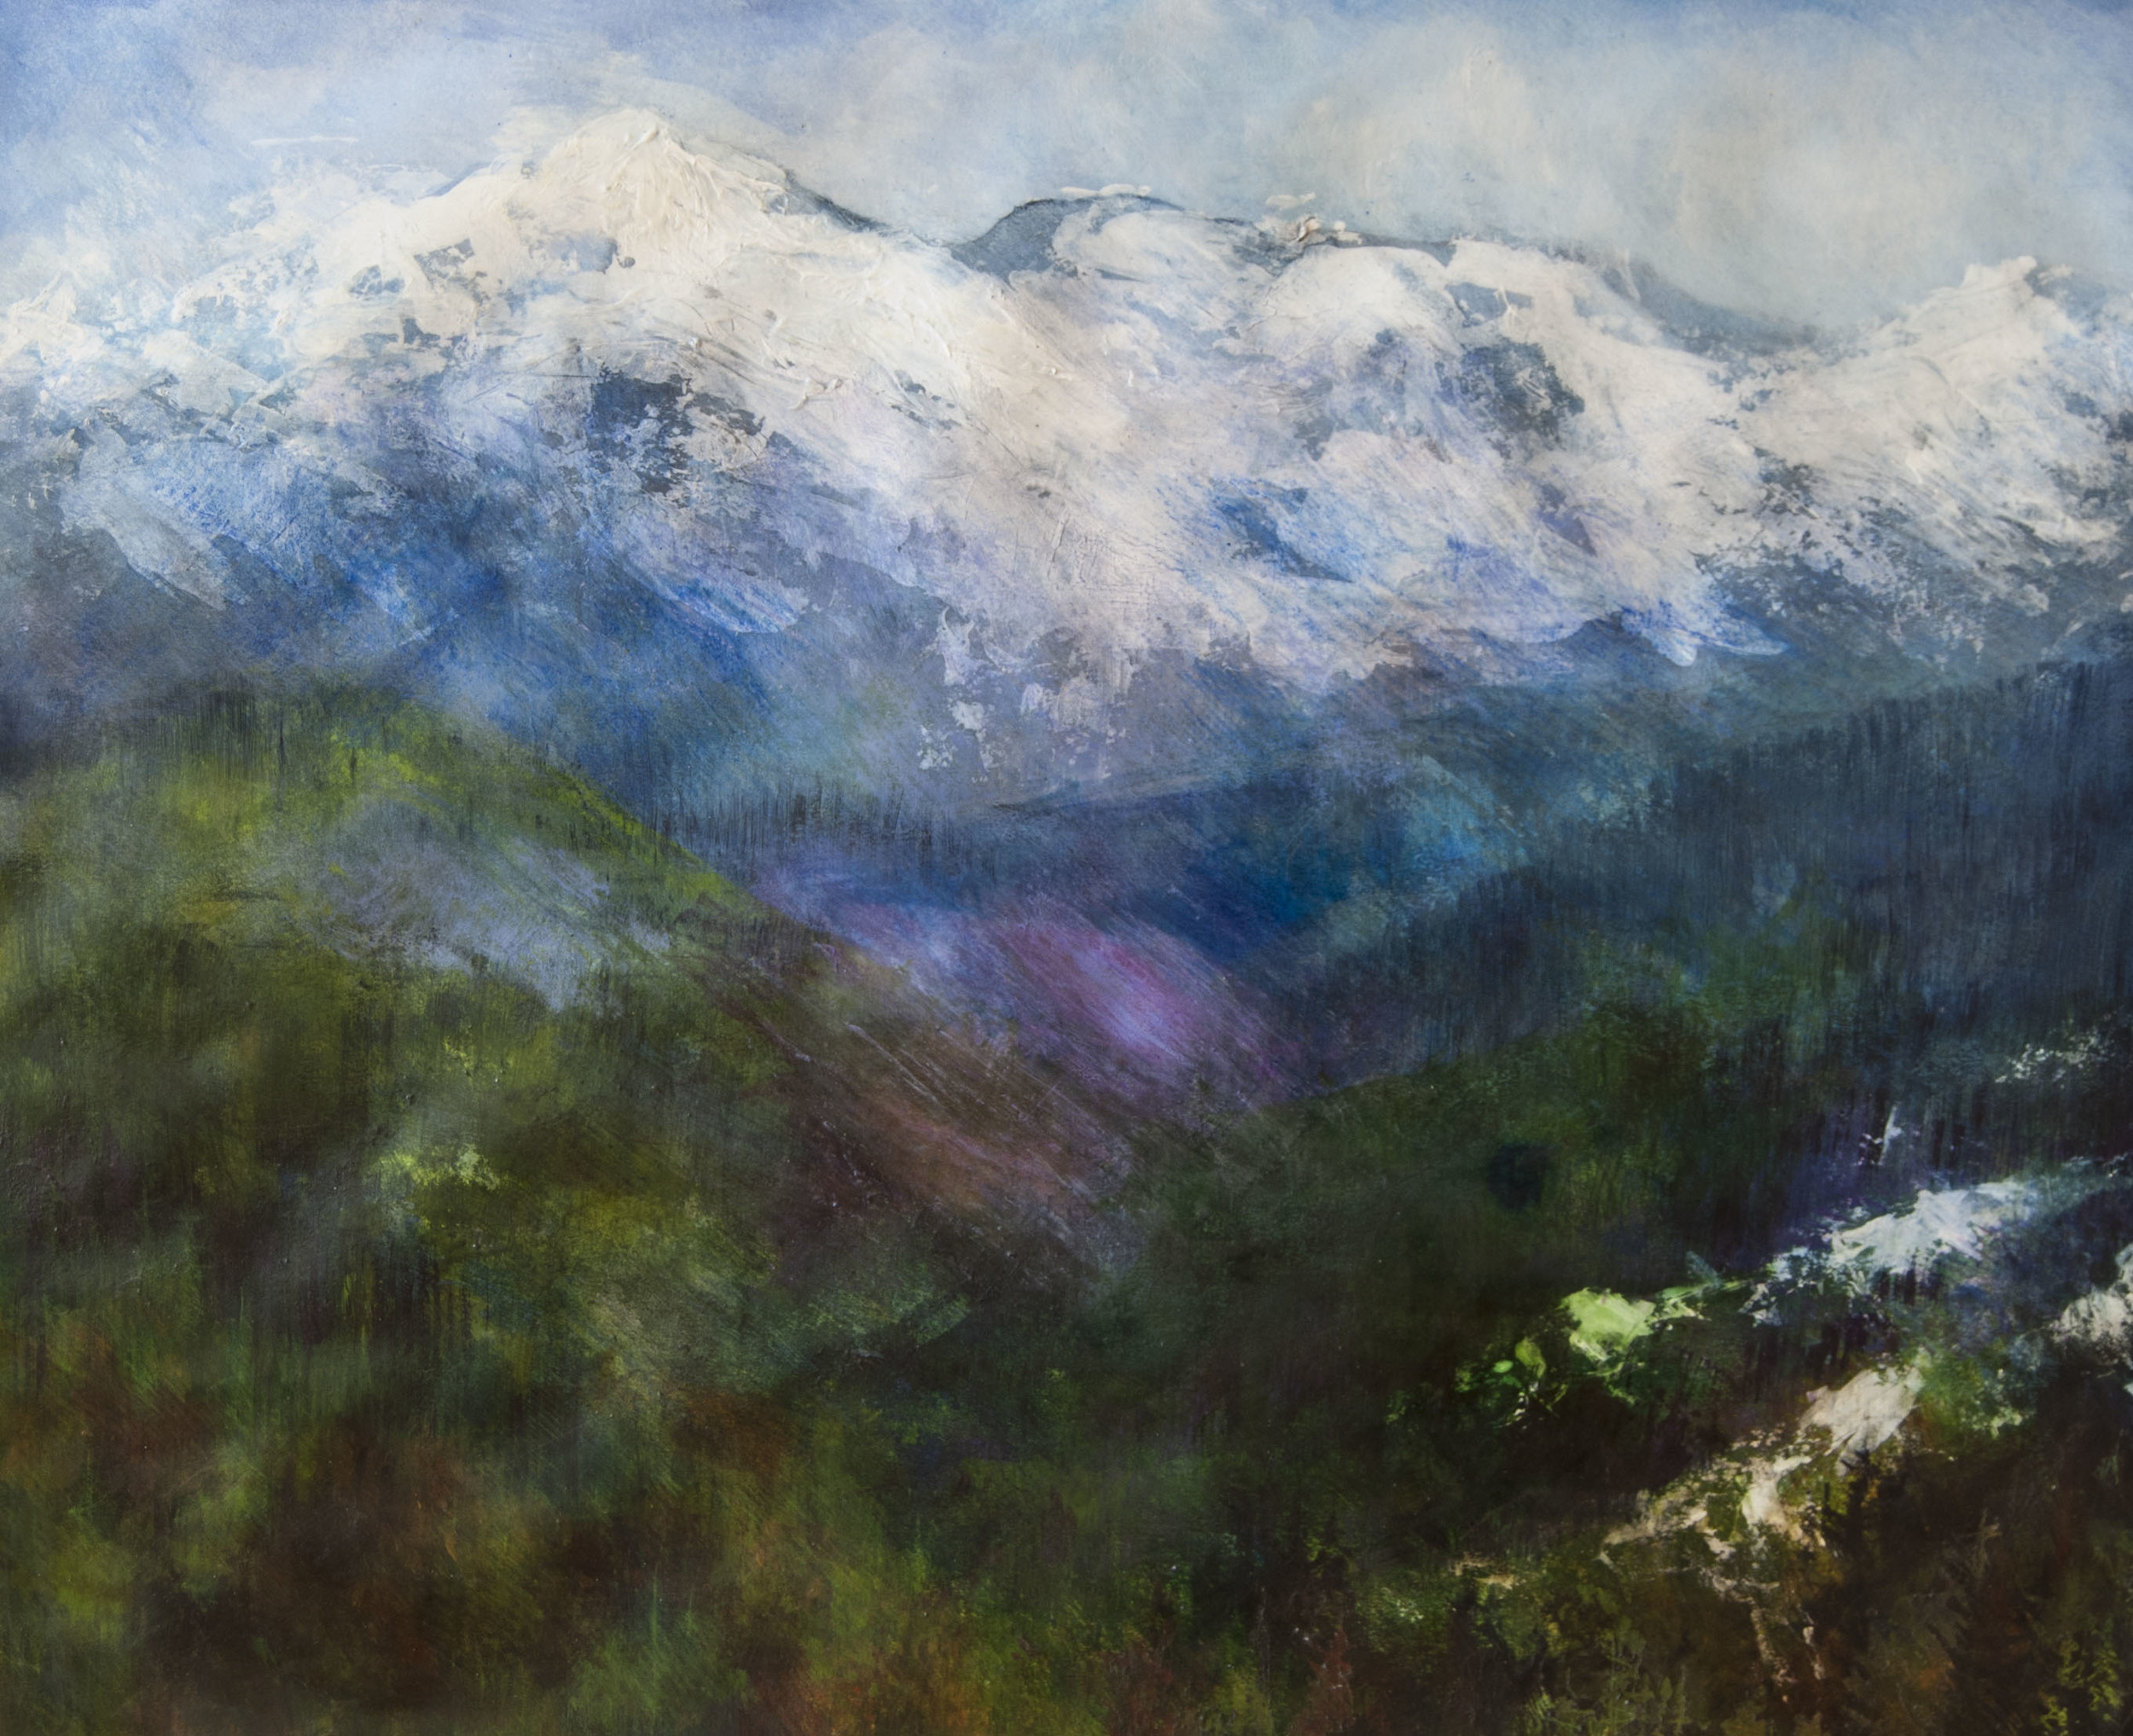  Enchanted Valley, Mt Olympus, WA, Watercolor, pencil, ink and acrylic on paper, 2011 32"x 38" 